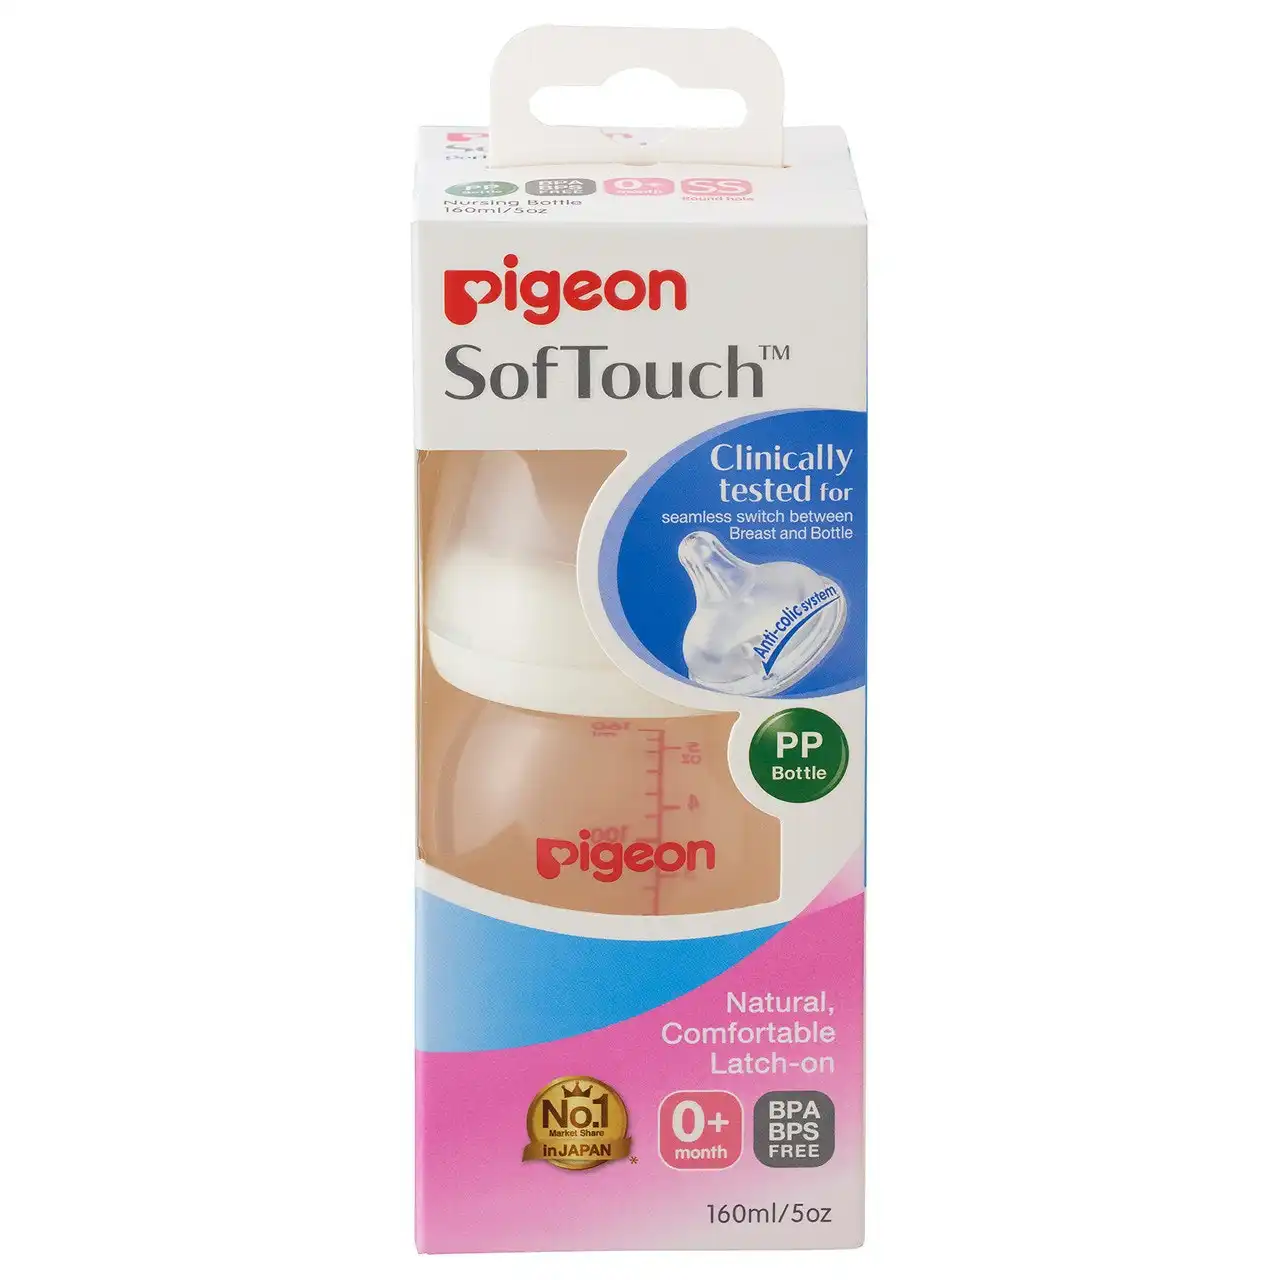 PIGEON Softouch Bottle PP 160ml